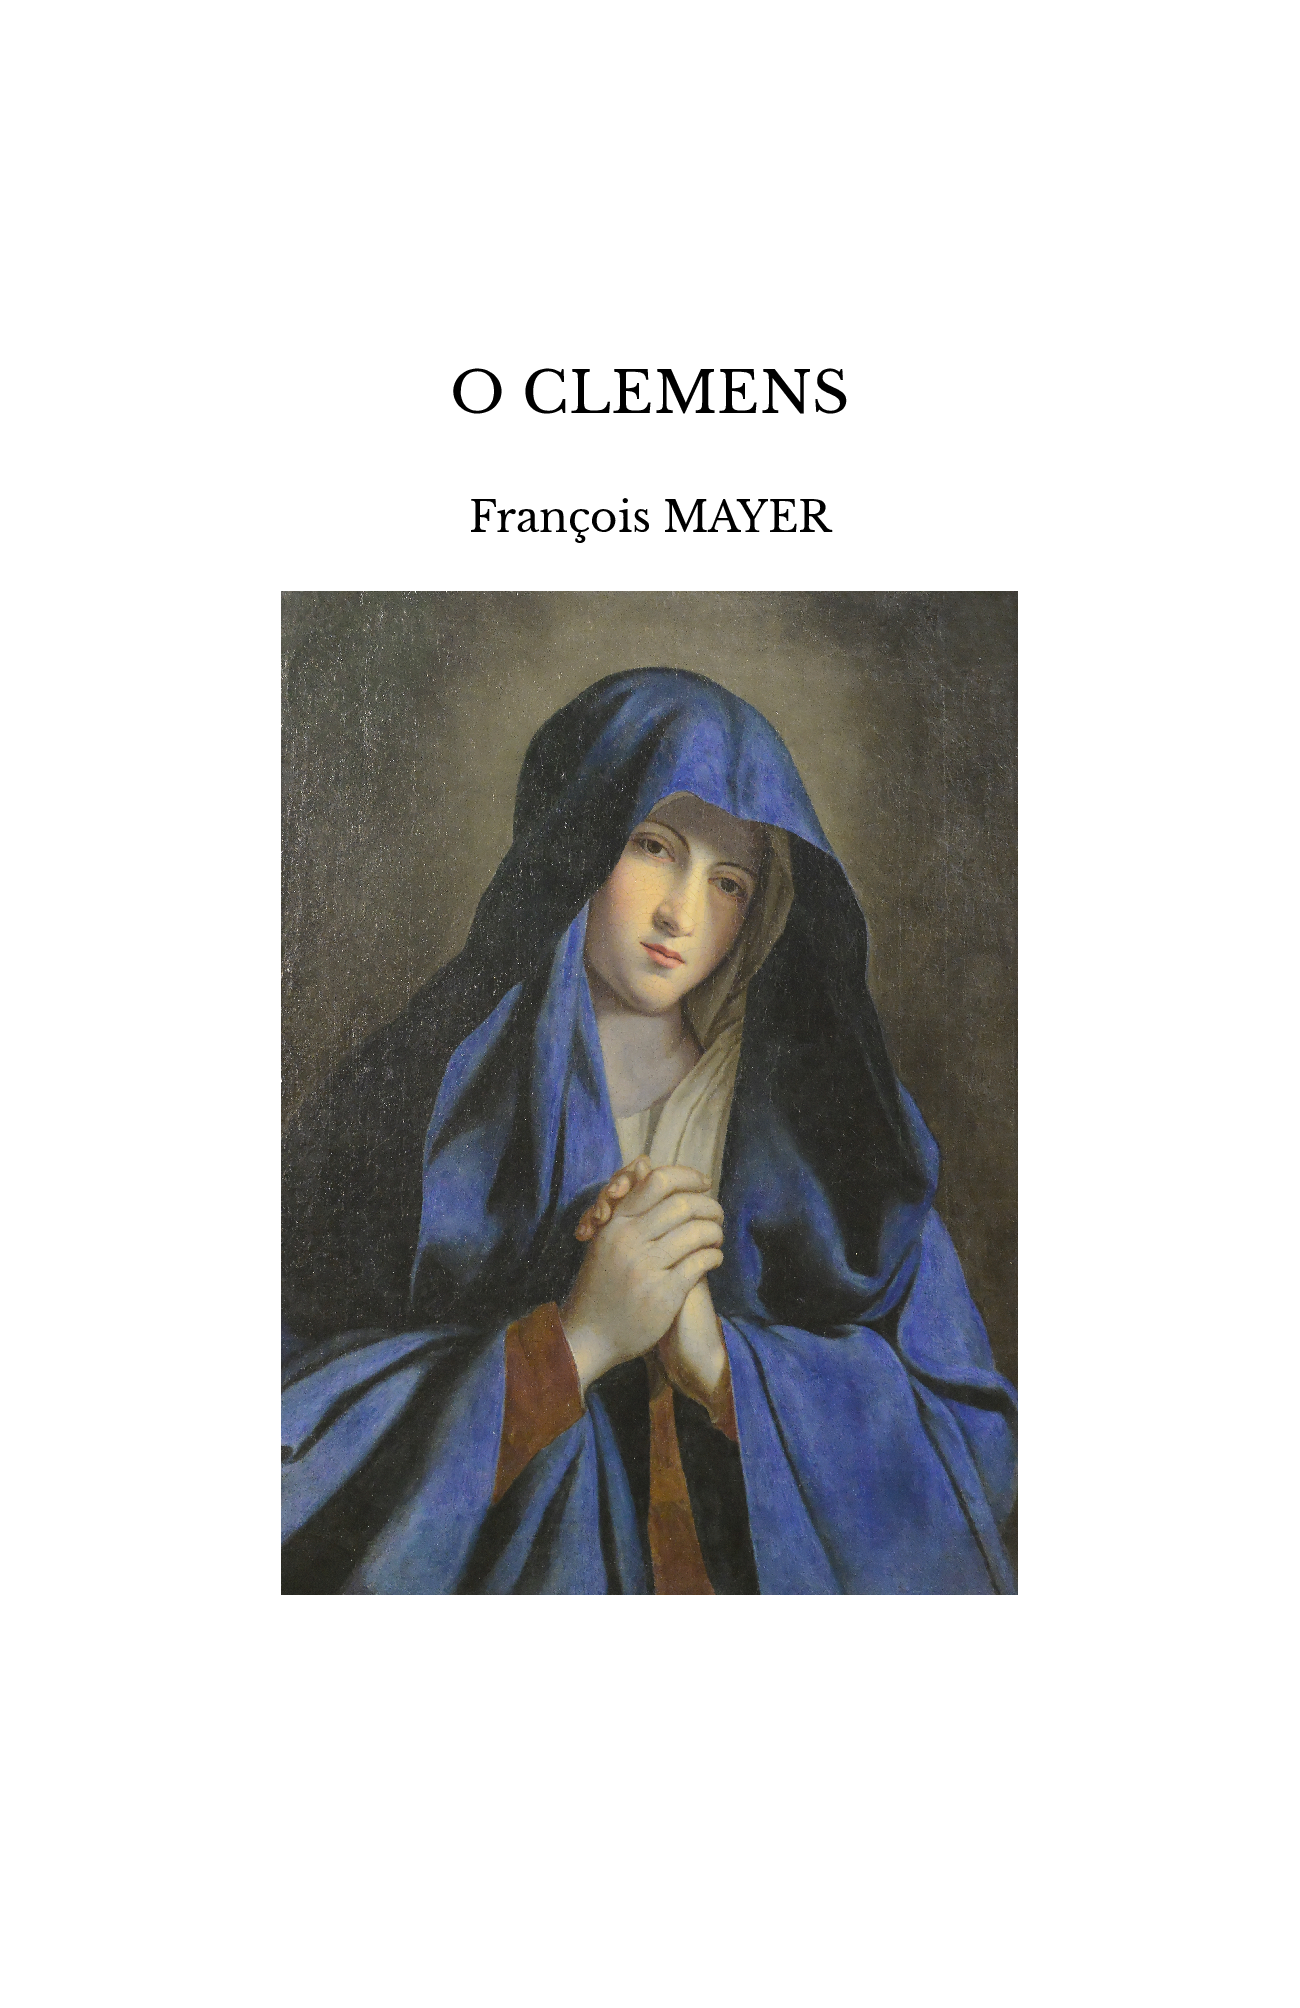 O CLEMENS